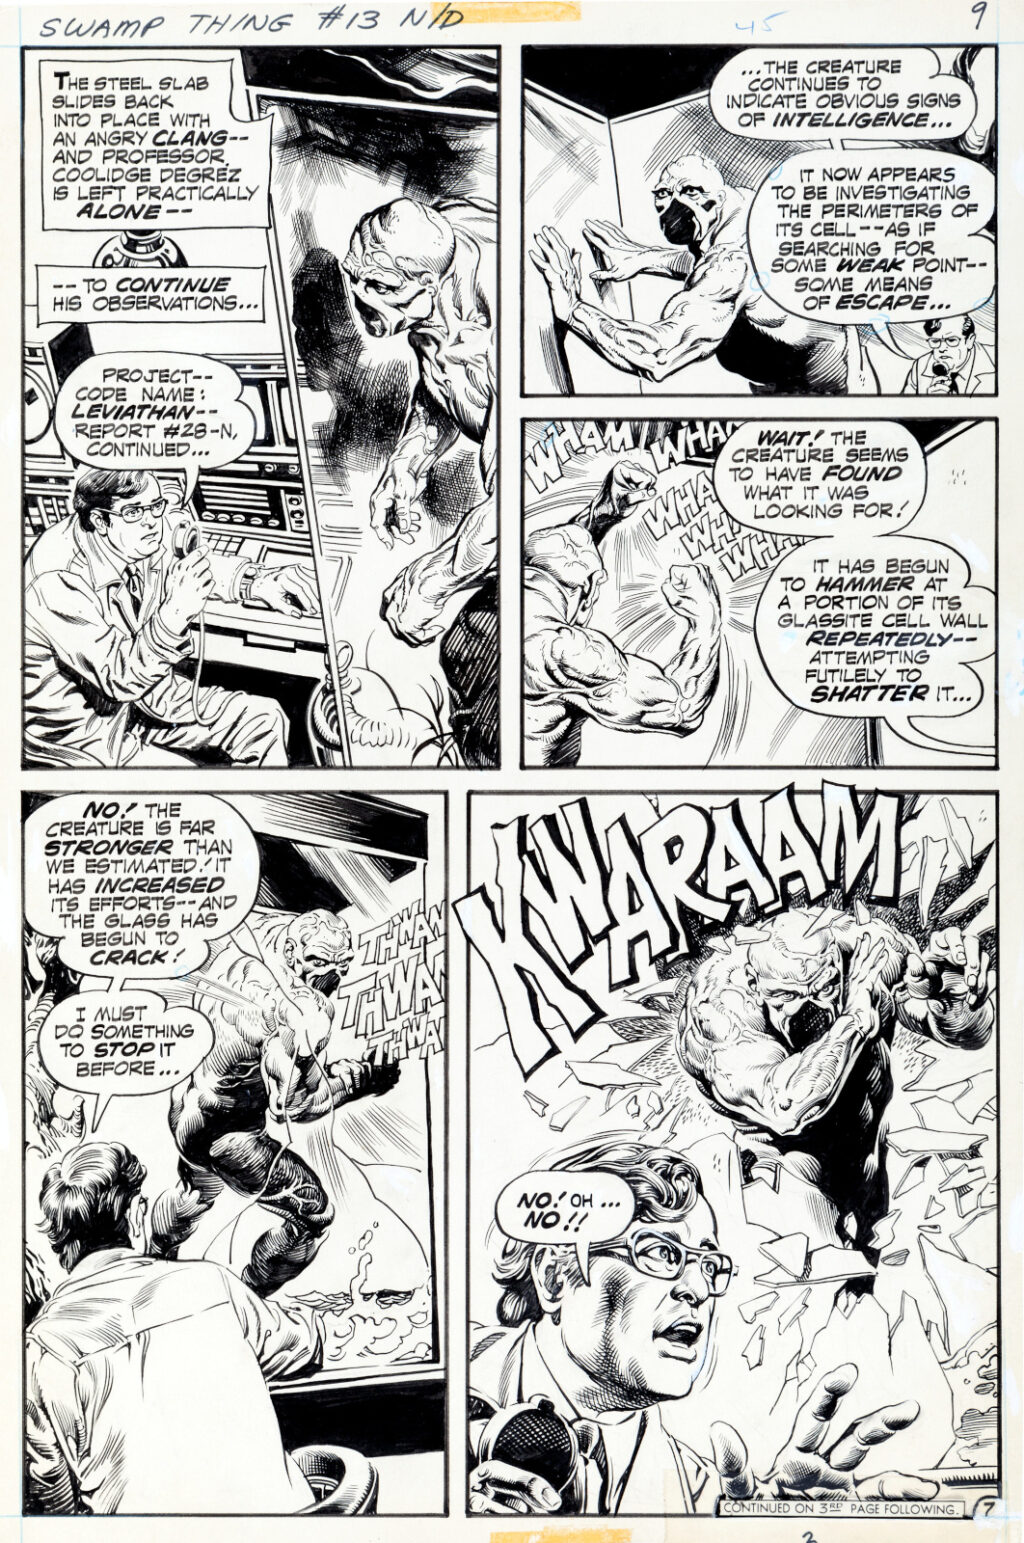 Swamp Thing issue 13 page 7 by Nestor Redondo